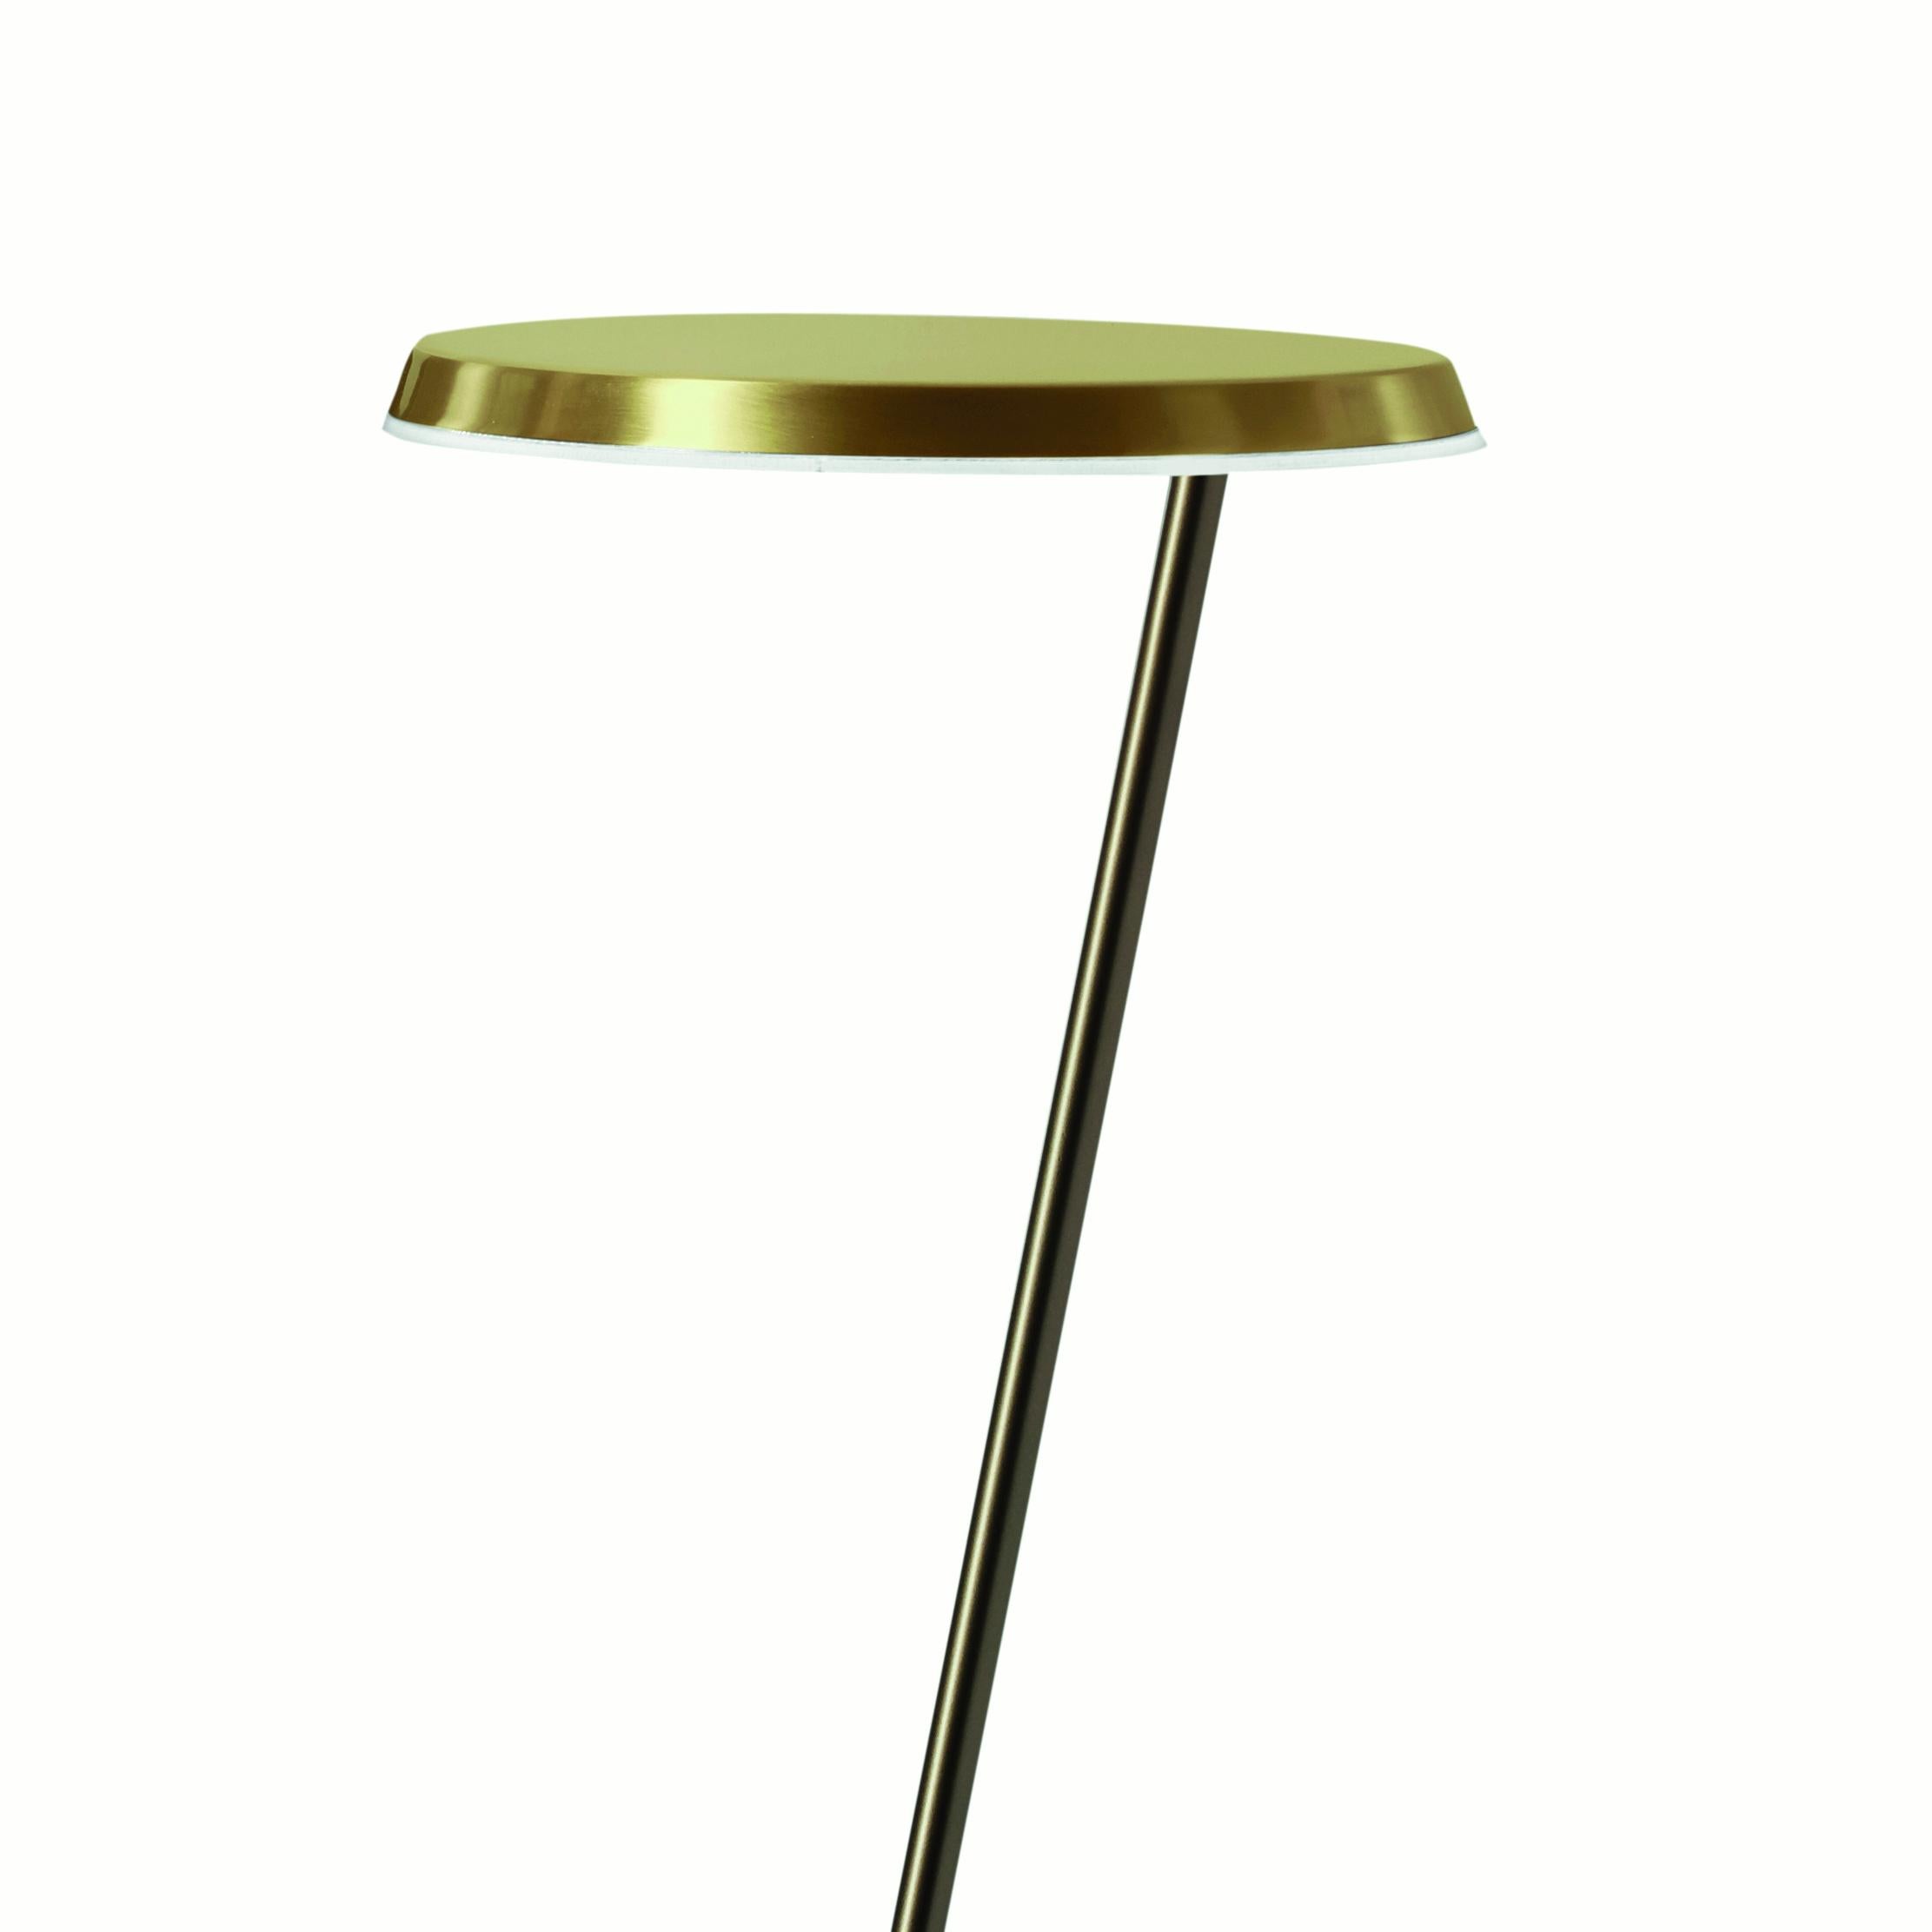 Floor lamp 'Amanita' designed by Mariana Pellegrino Soto in 1970.
Floor led lamp, with dimmable switch, giving direct light. Base and sloped stem in anodic bronze, adjustable reflector in satin gold. PMMA transparent closing disk.
Manufactured by